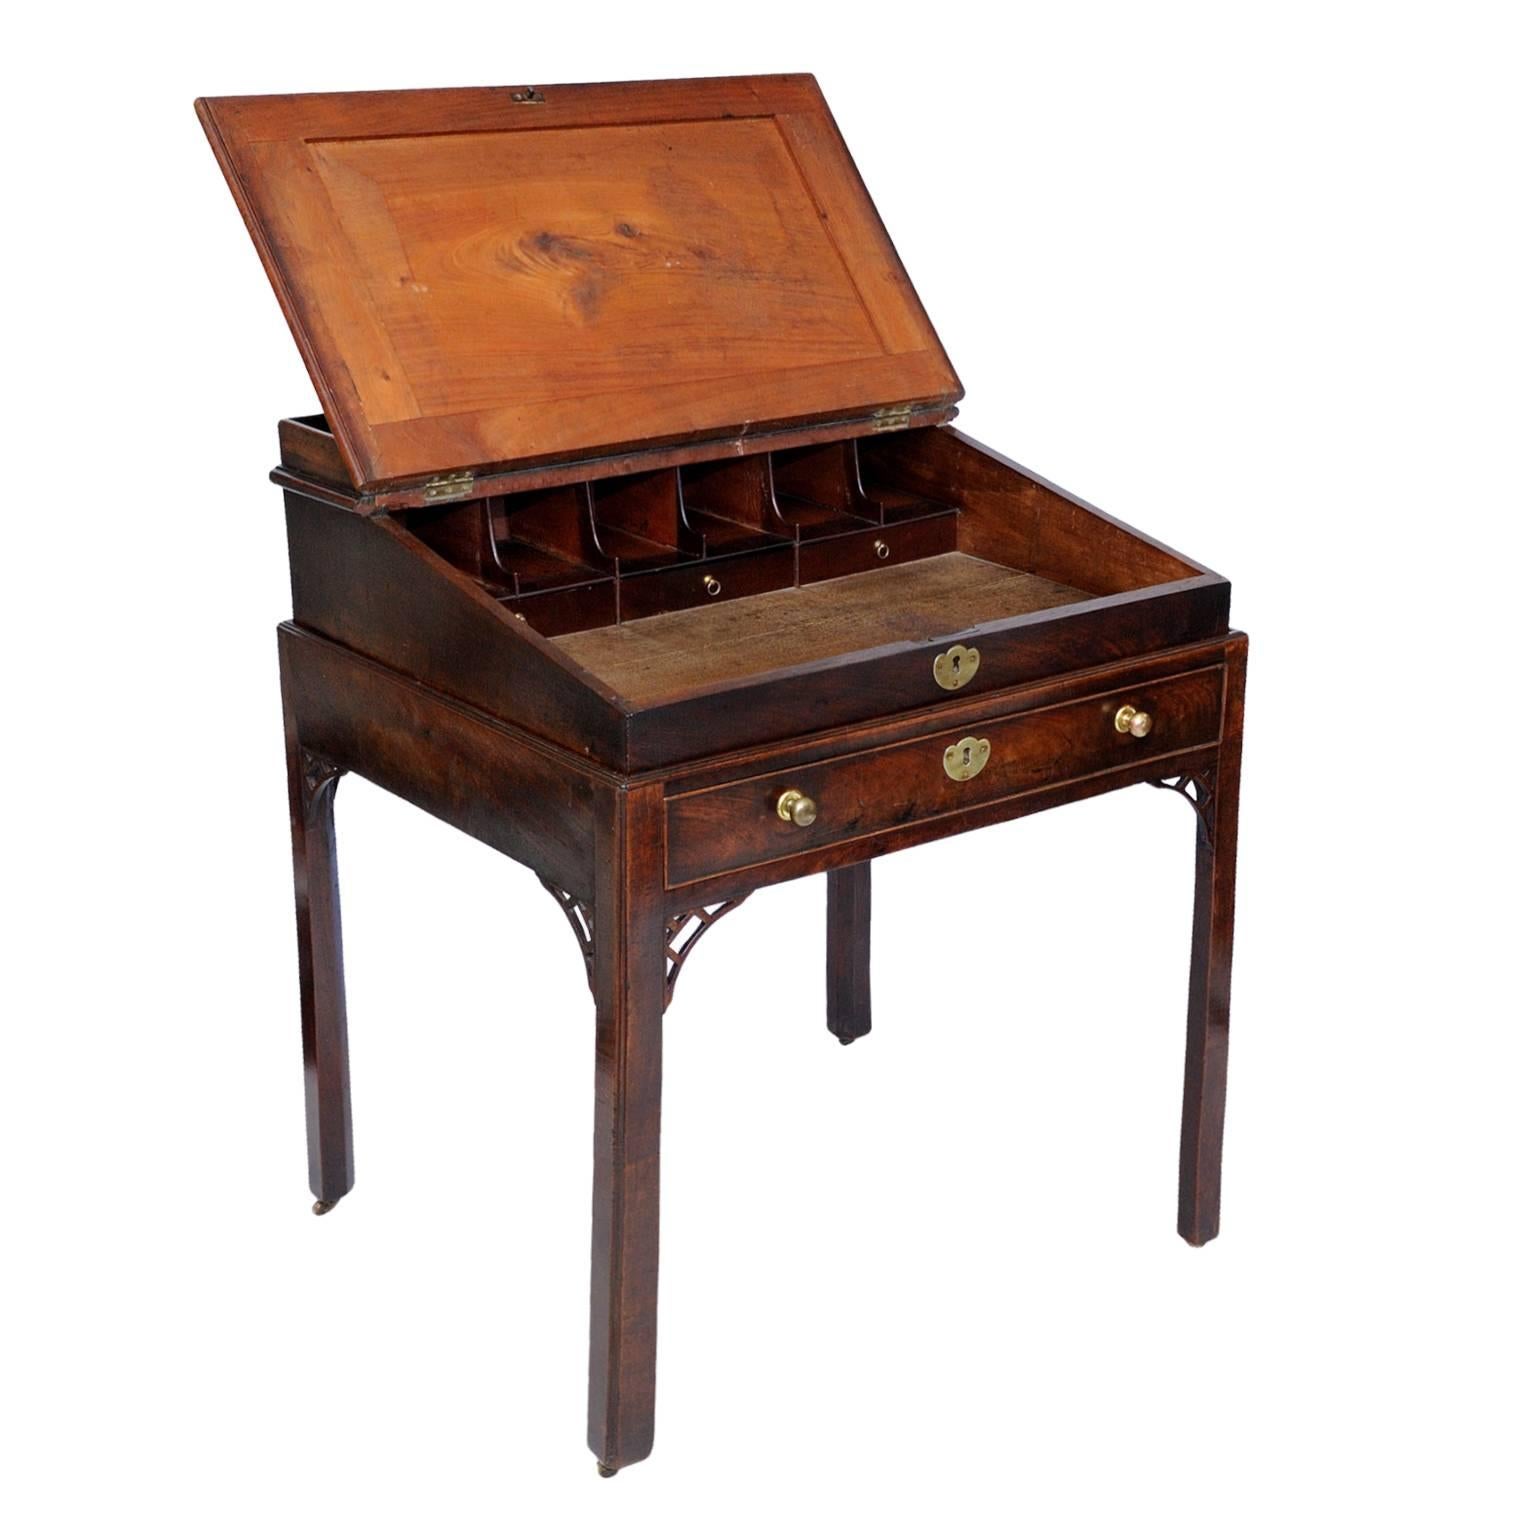 This really is a superb item, it's a rare mid-18th century Chippendale period George III mahogany Gentleman’s travelling desk. Featuring a lovely original tooled leather top, standing on small brass castors with long lower drawer and pigeon holes,